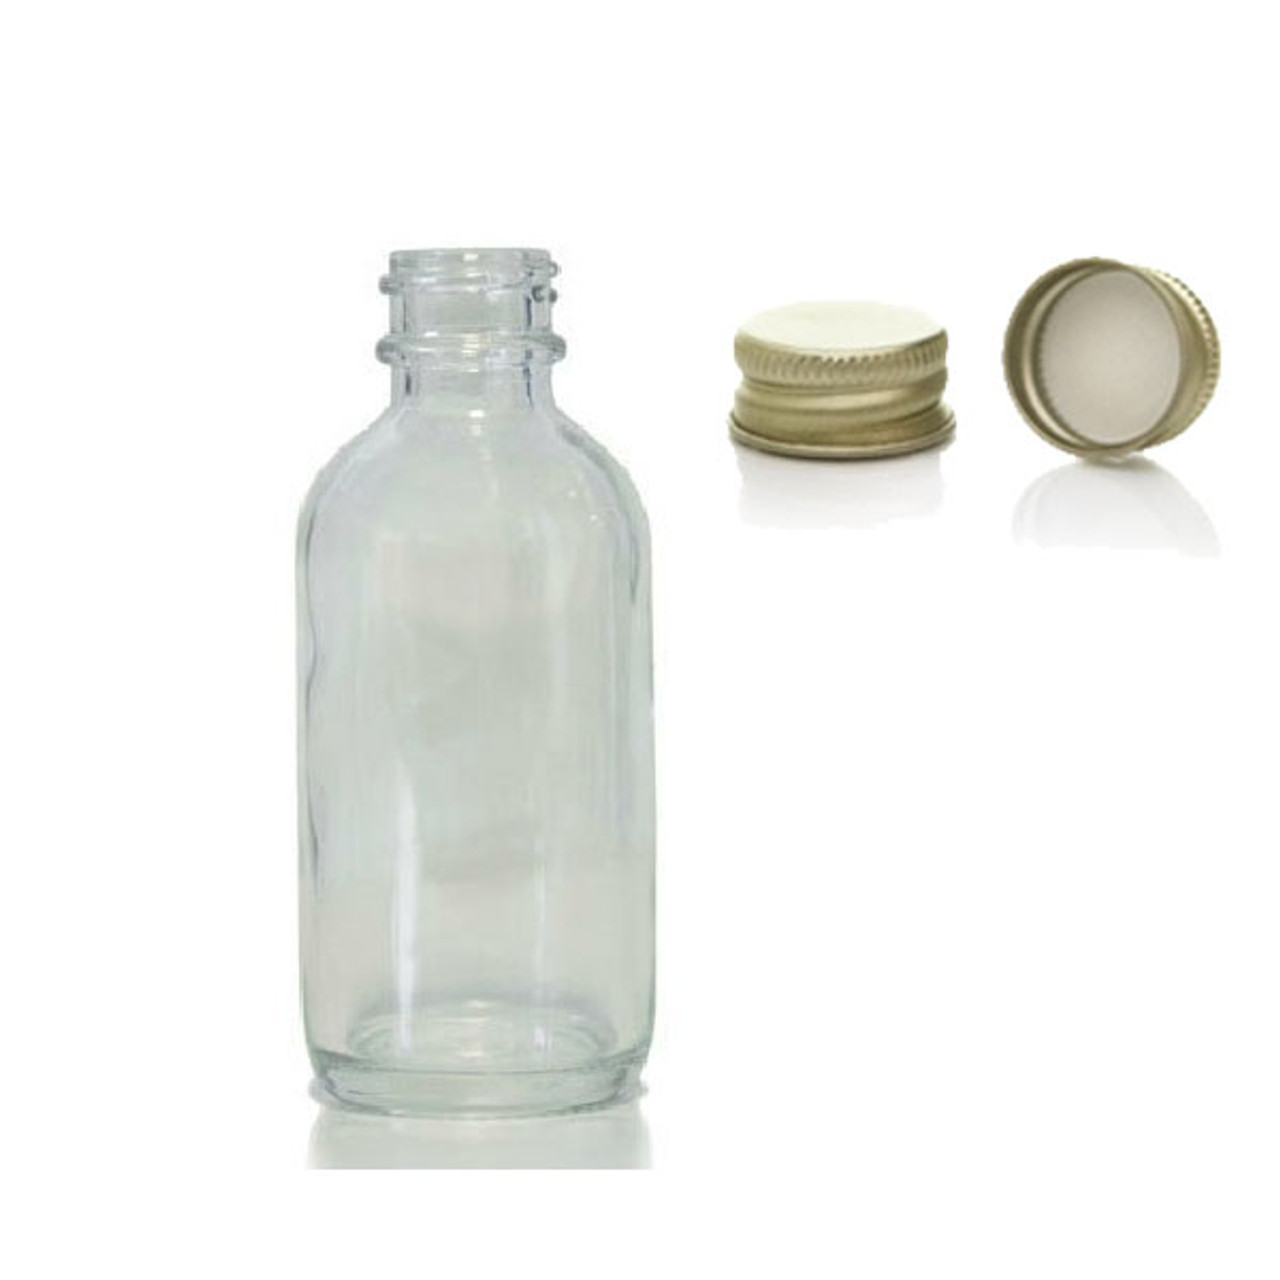 10PCS 2 oz Small Clear Glass Bottles(60ml)With 2 Stainless Steel Funnels&32  Chalkboard Labels,Boston Round Shot Bottles with Caps,Perfect for Party